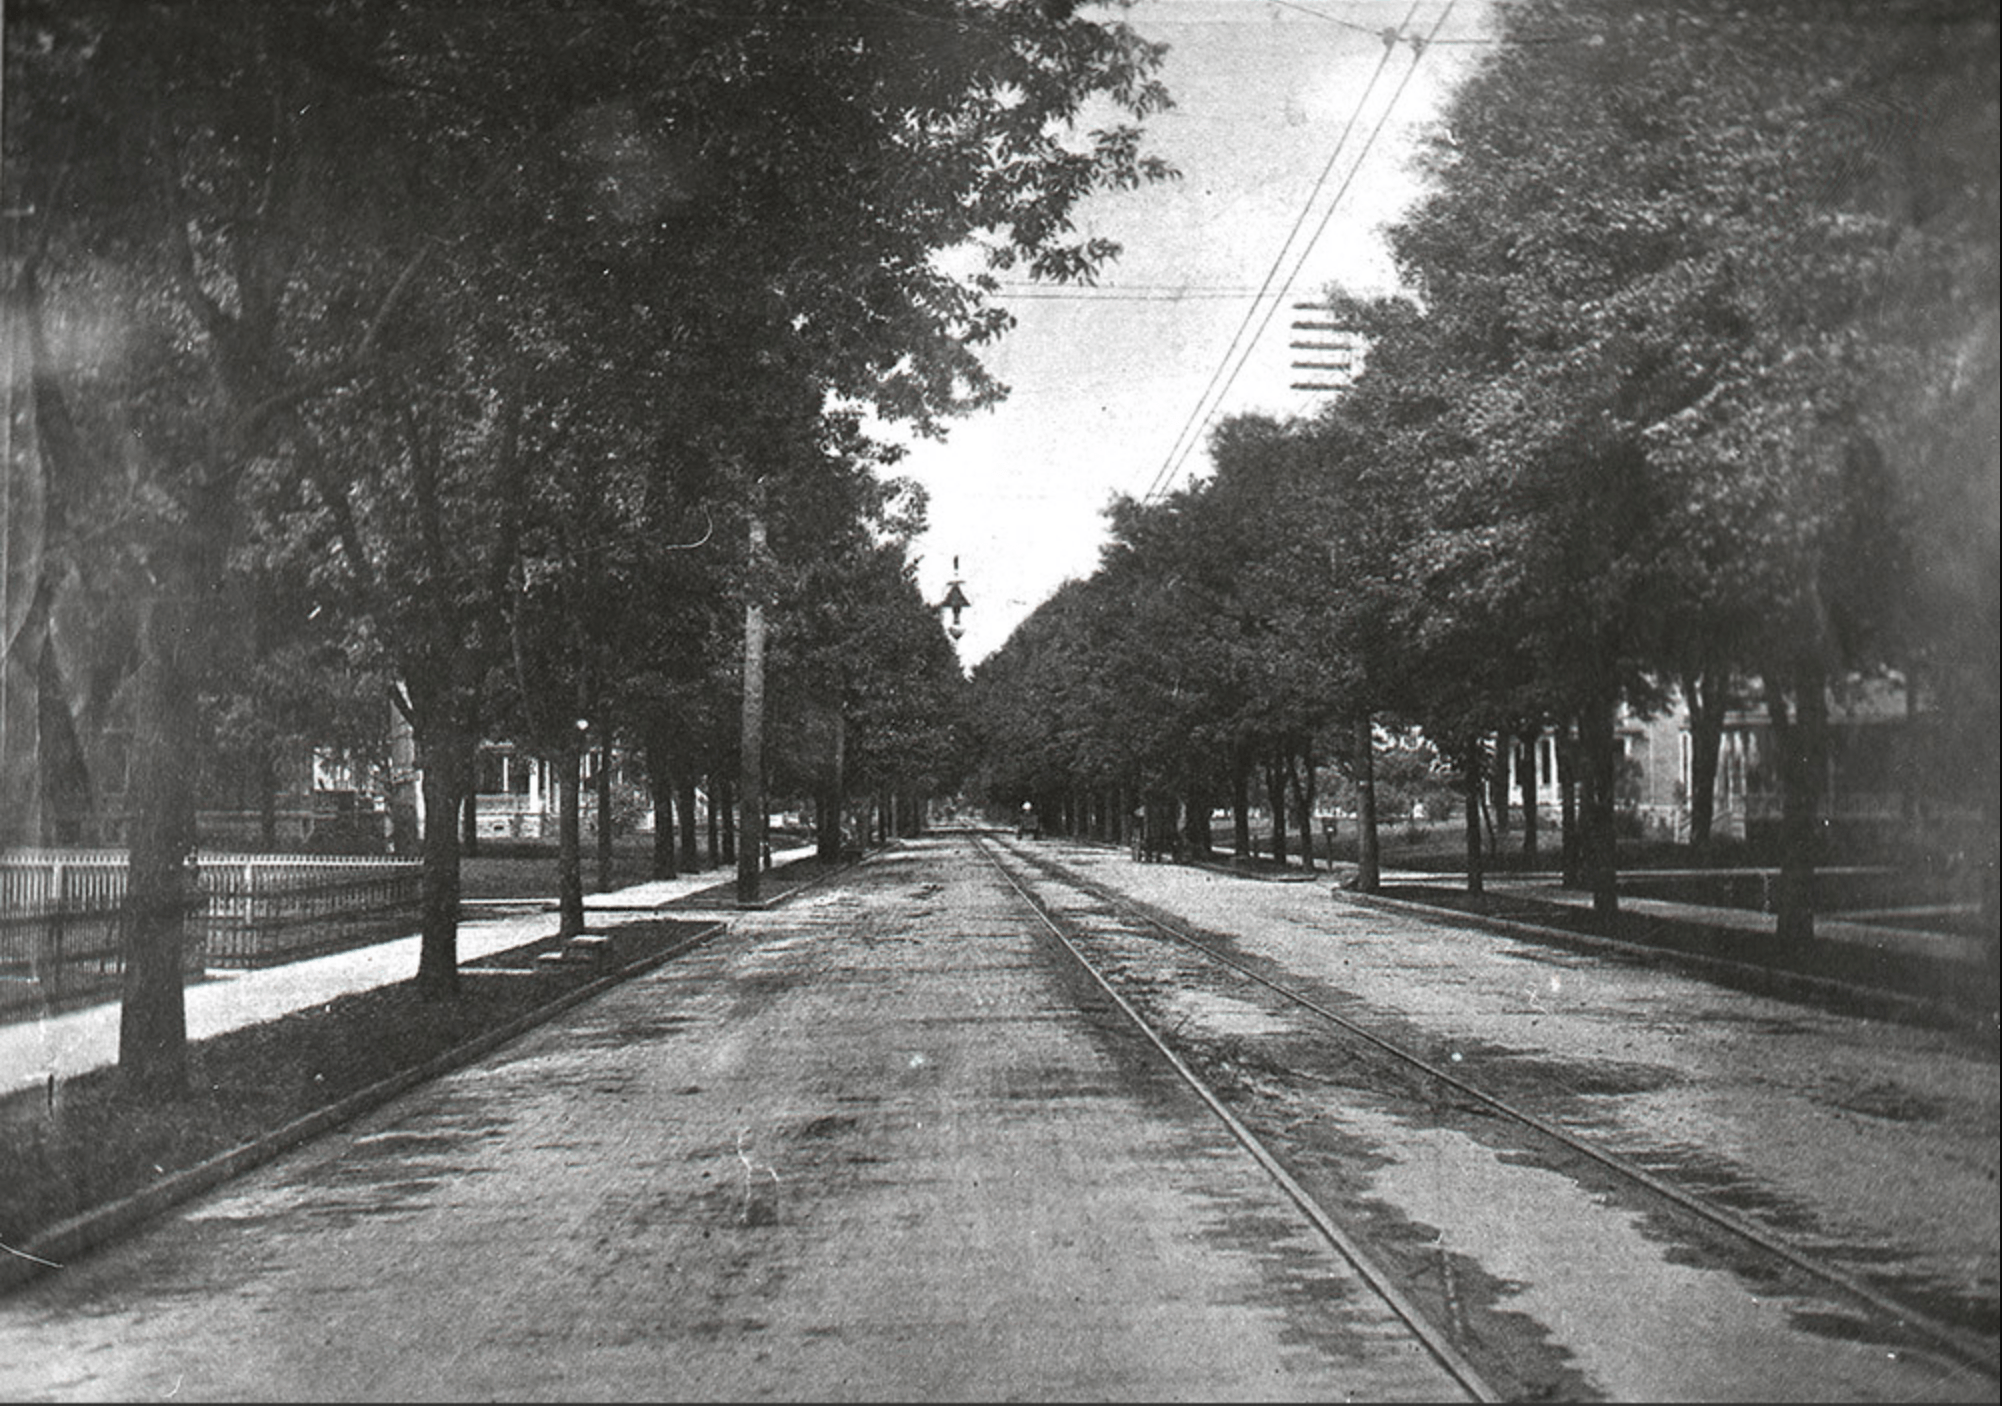 Historic photo shows an interurban rail line running through a residential area on Bowling Green's North Main Street in the early 1900s. 